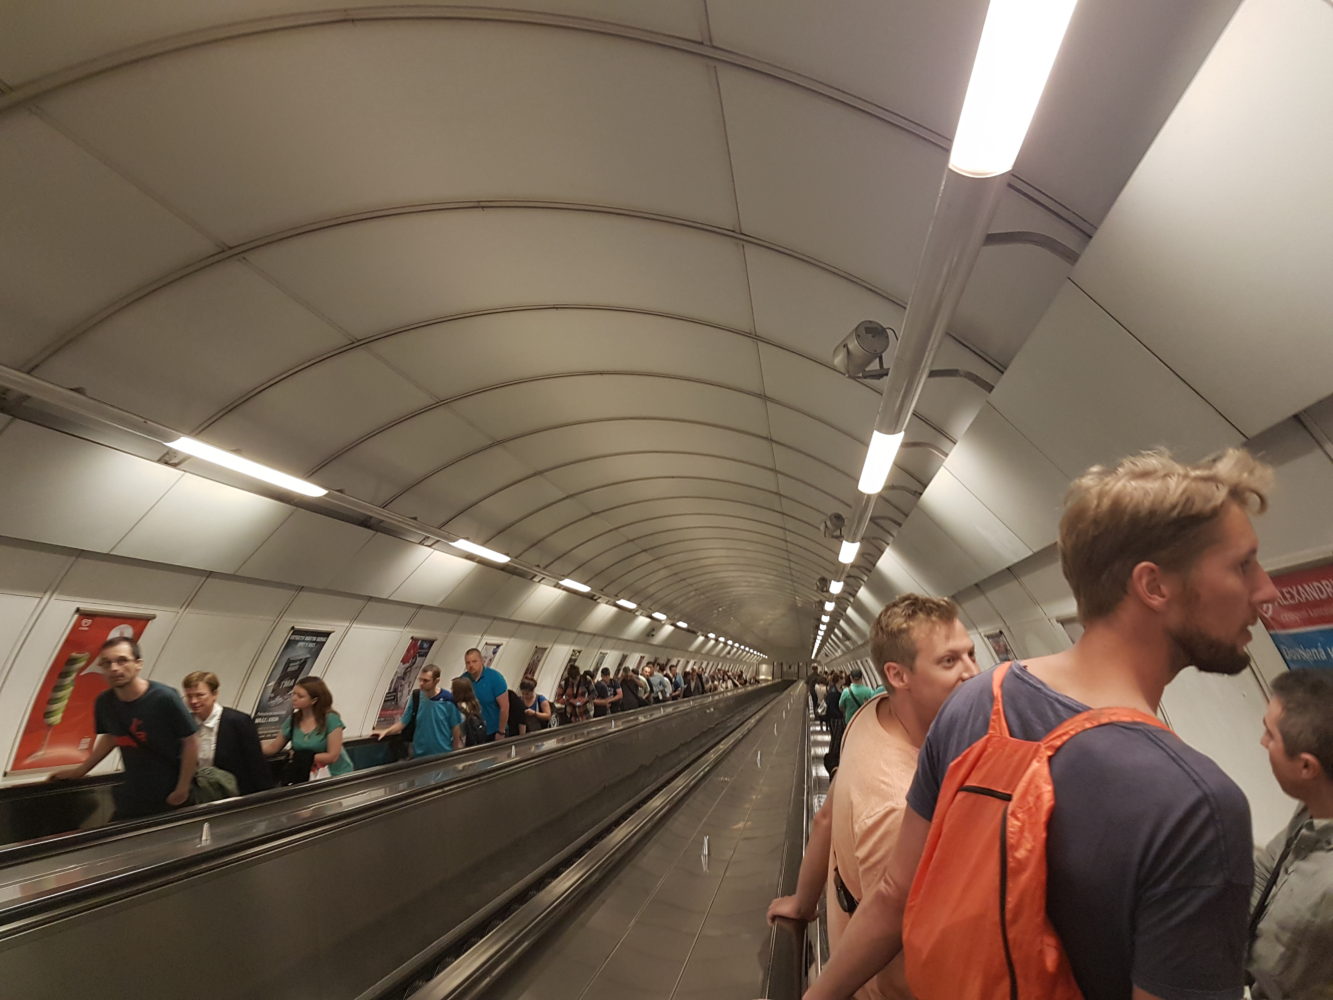 Prague Subway - Hope You are Not Afraid of Heights